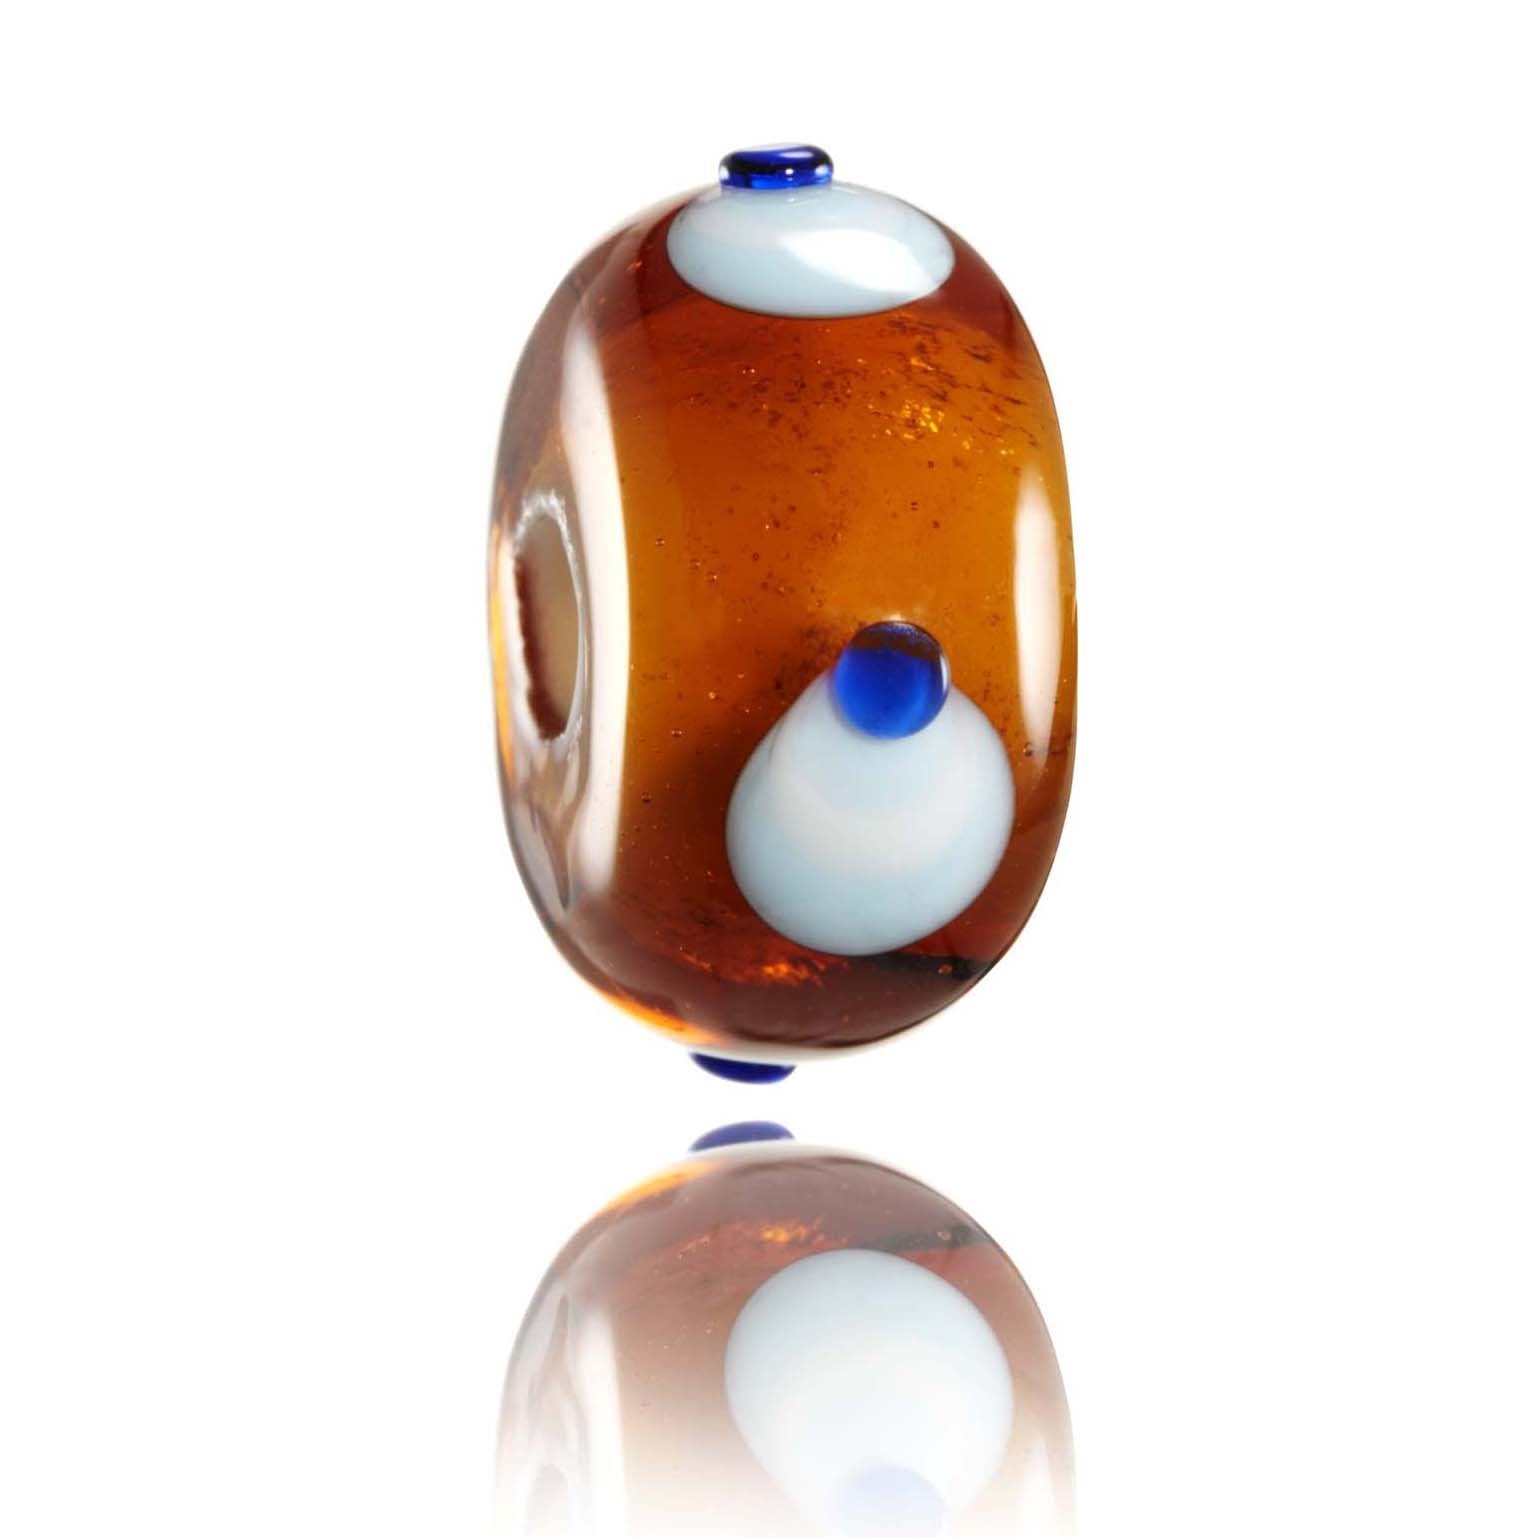 Brown amber glass bead with blue dots for Sumatra, Indonesia.